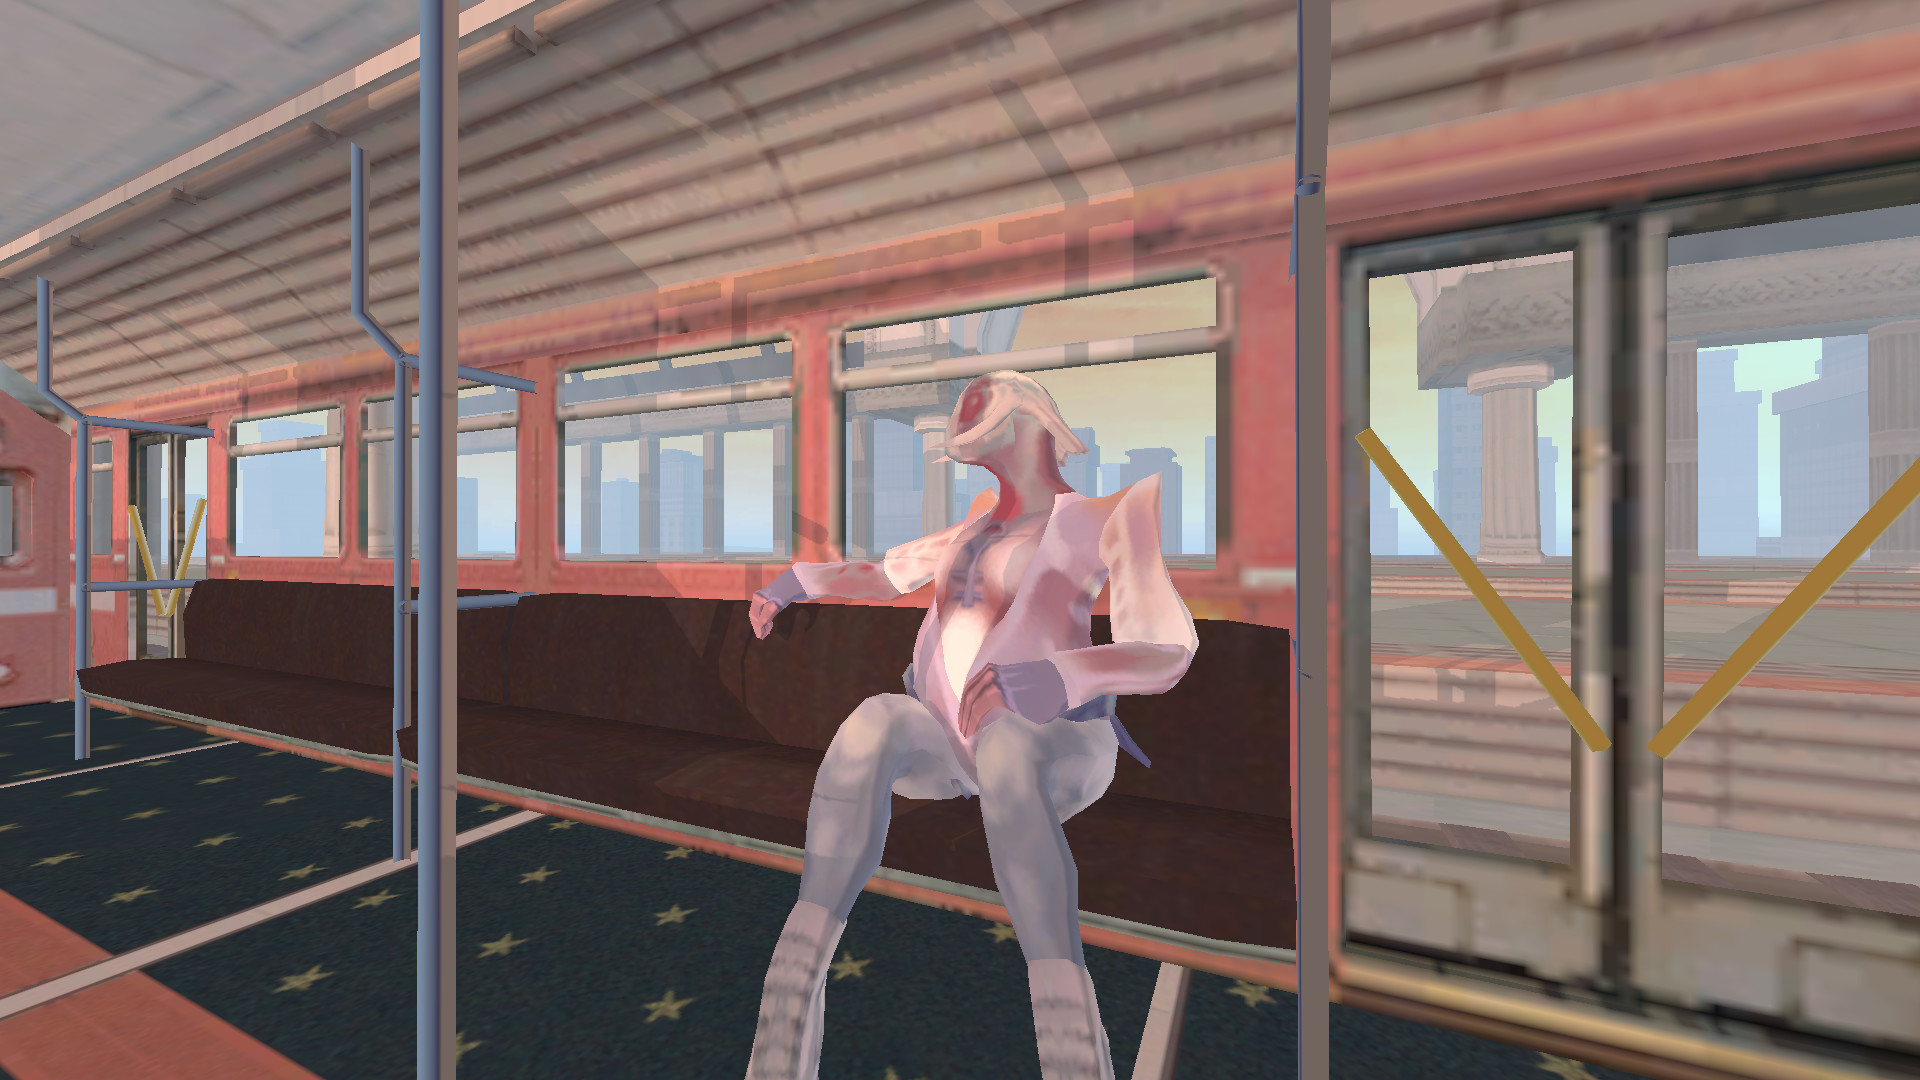 Video game still of pink character sitting in empty subway car.